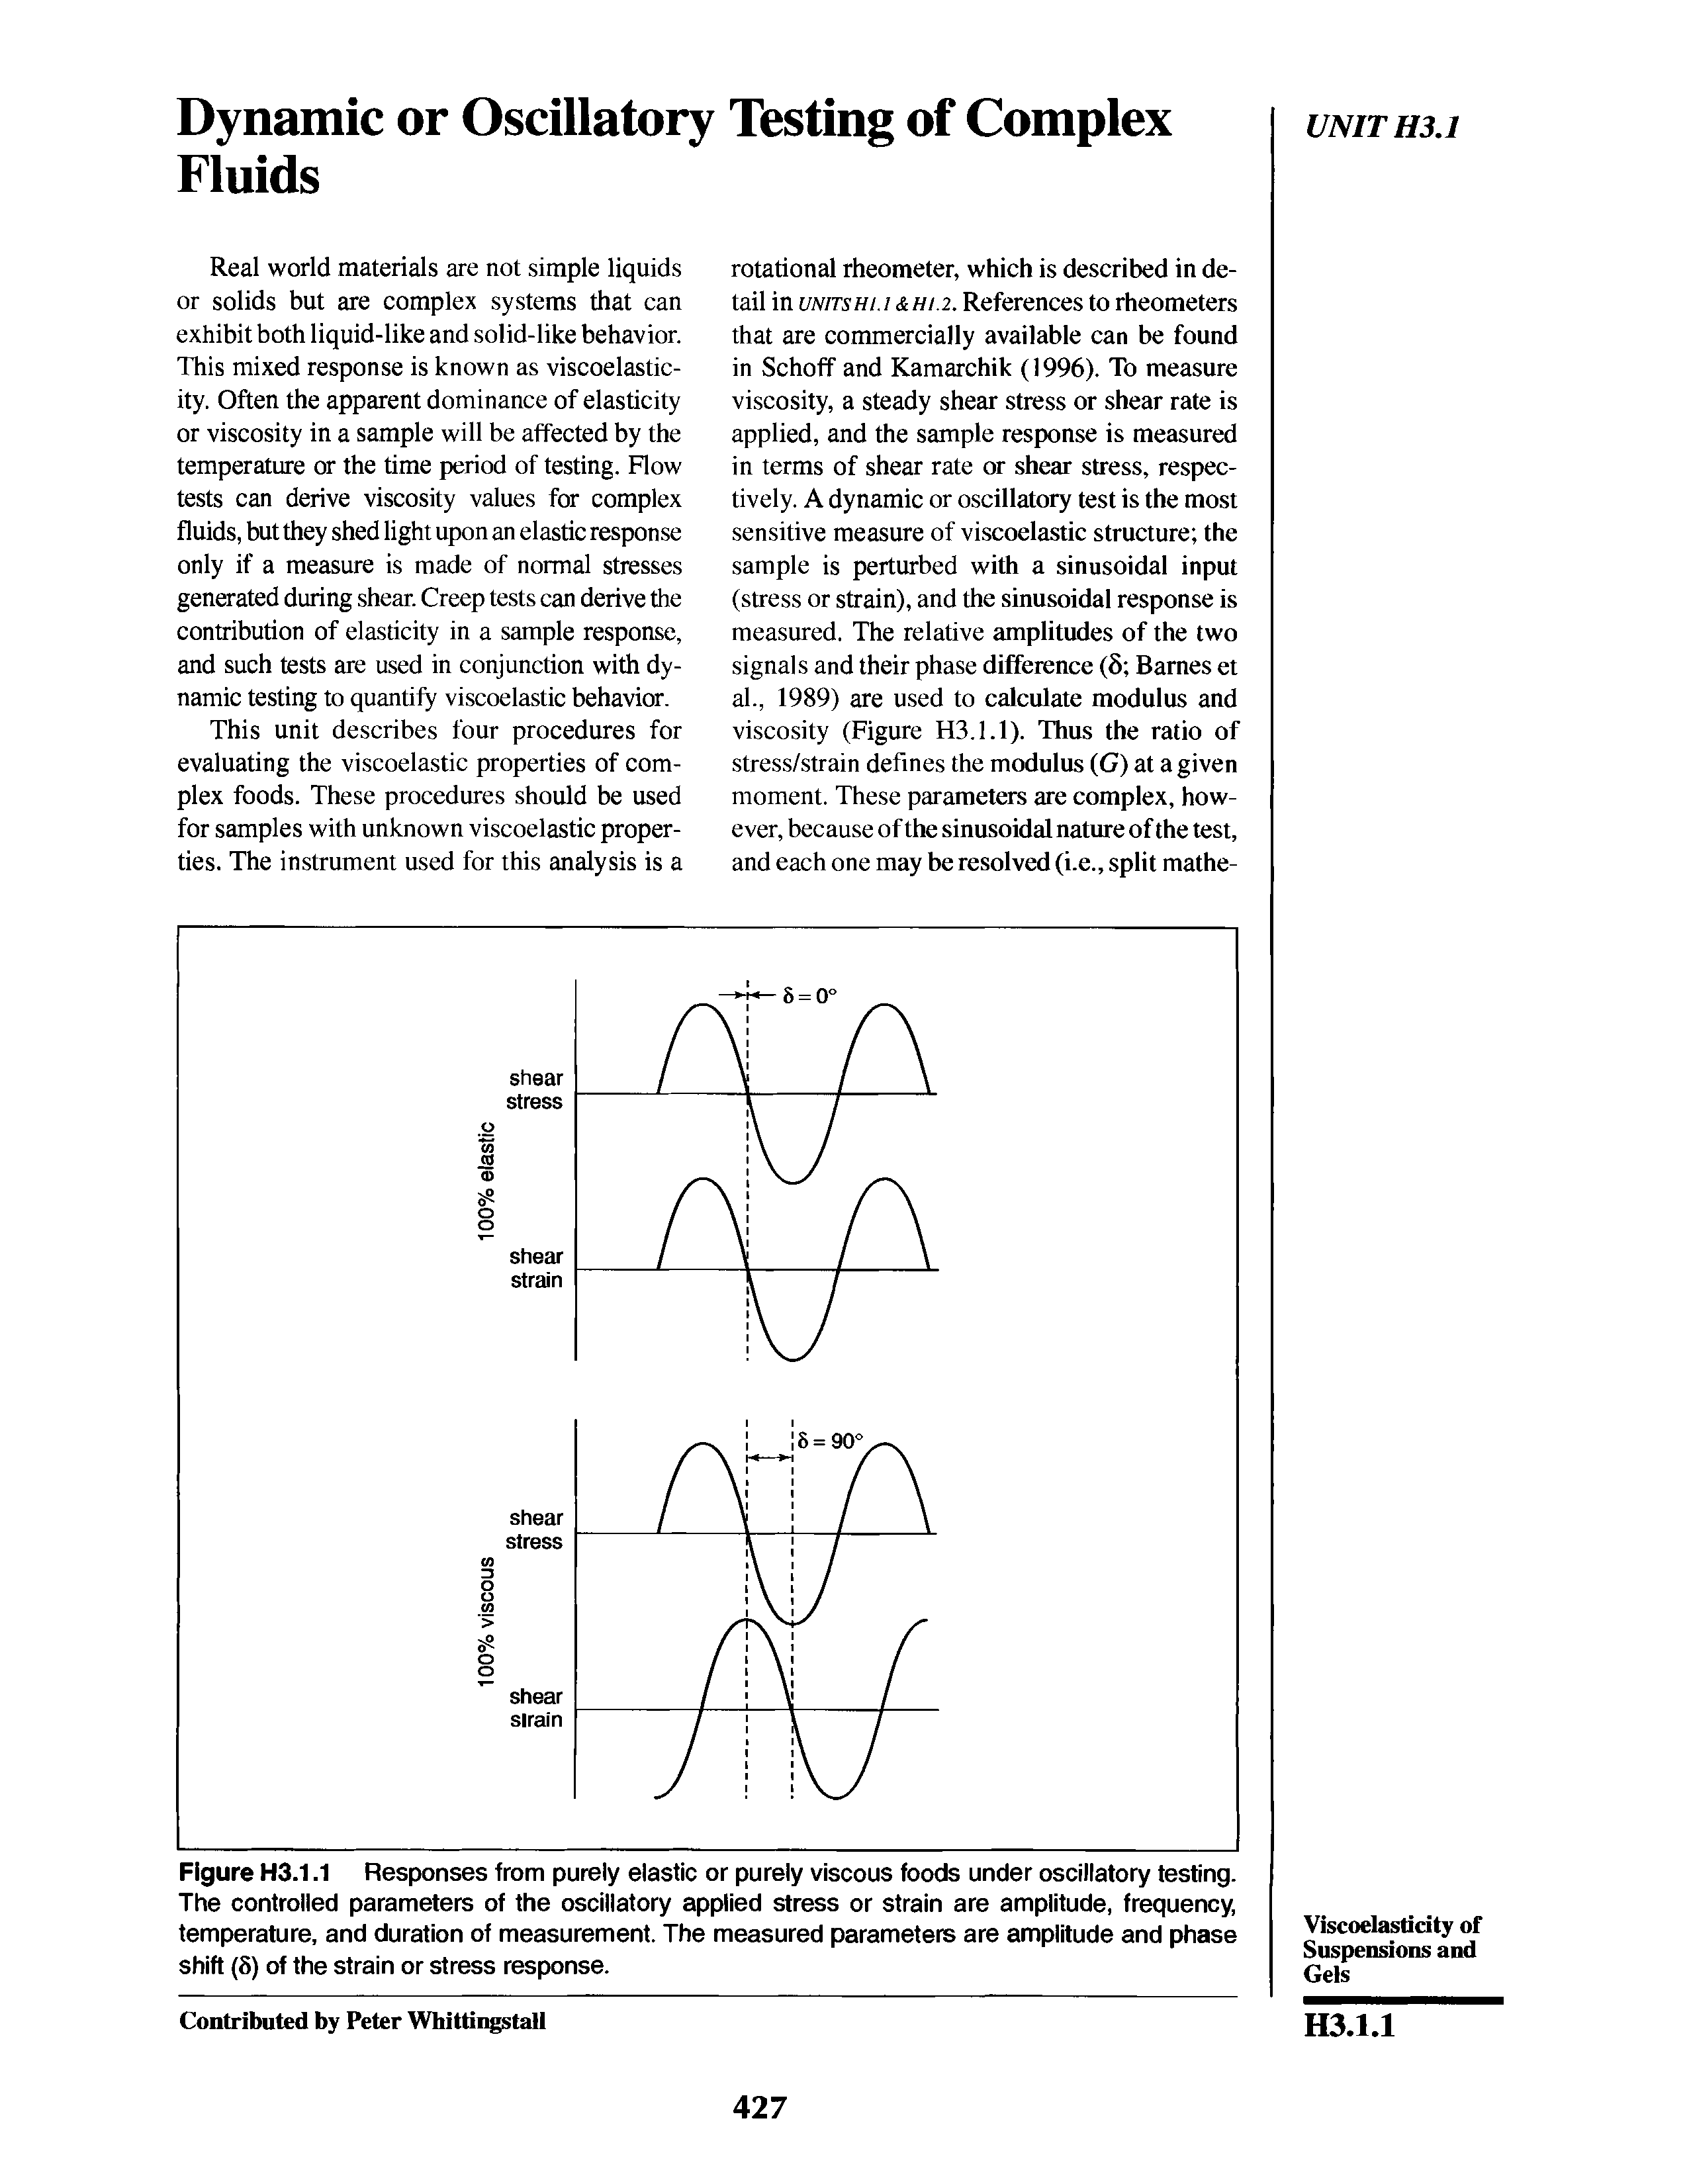 Figure H3.1.1 Responses from purely elastic or purely viscous foods under oscillatory testing. The controlled parameters of the oscillatory applied stress or strain are amplitude, frequency, temperature, and duration of measurement. The measured parameters are amplitude and phase shift (8) of the strain or stress response.